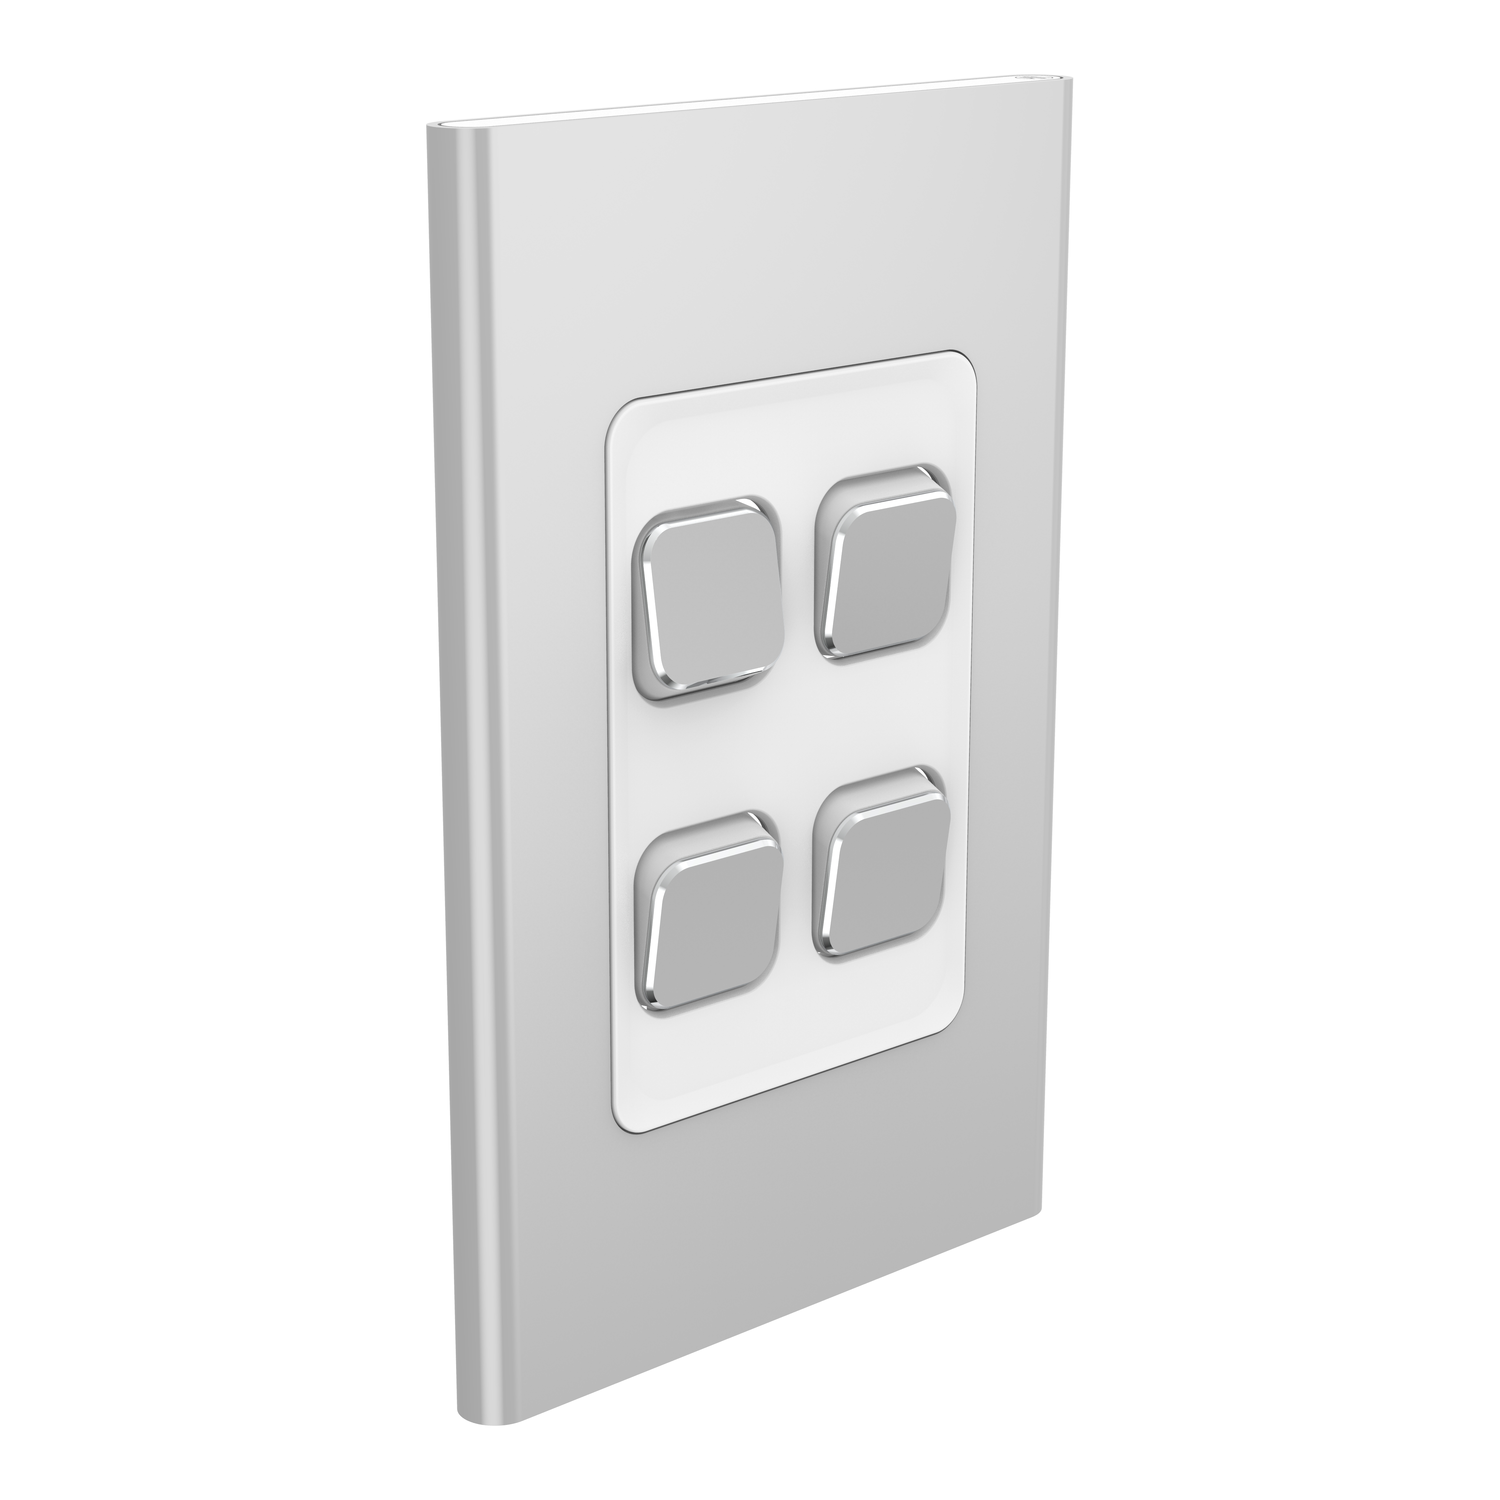 PDL Iconic Styl - Cover Plate Switch 4-Gang - Silver